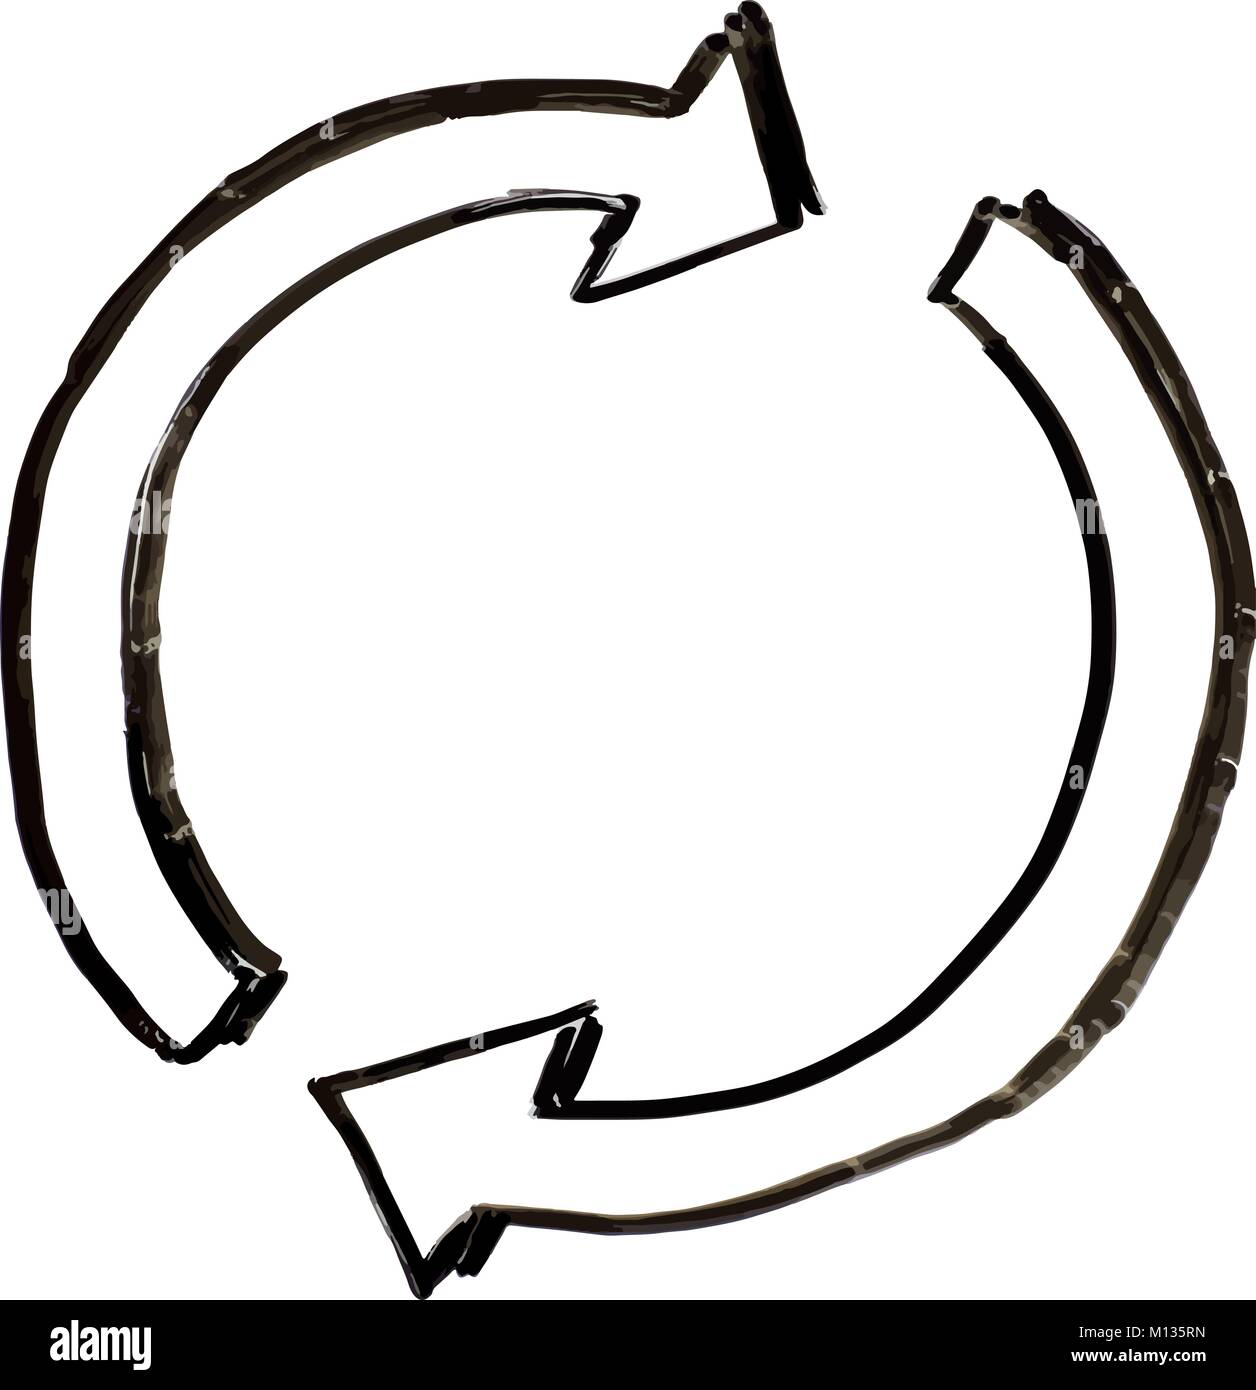 An illustration of two half circles with arrow heads spinning or turning or rotating clockwise in the style of a white board drawing Stock Vector